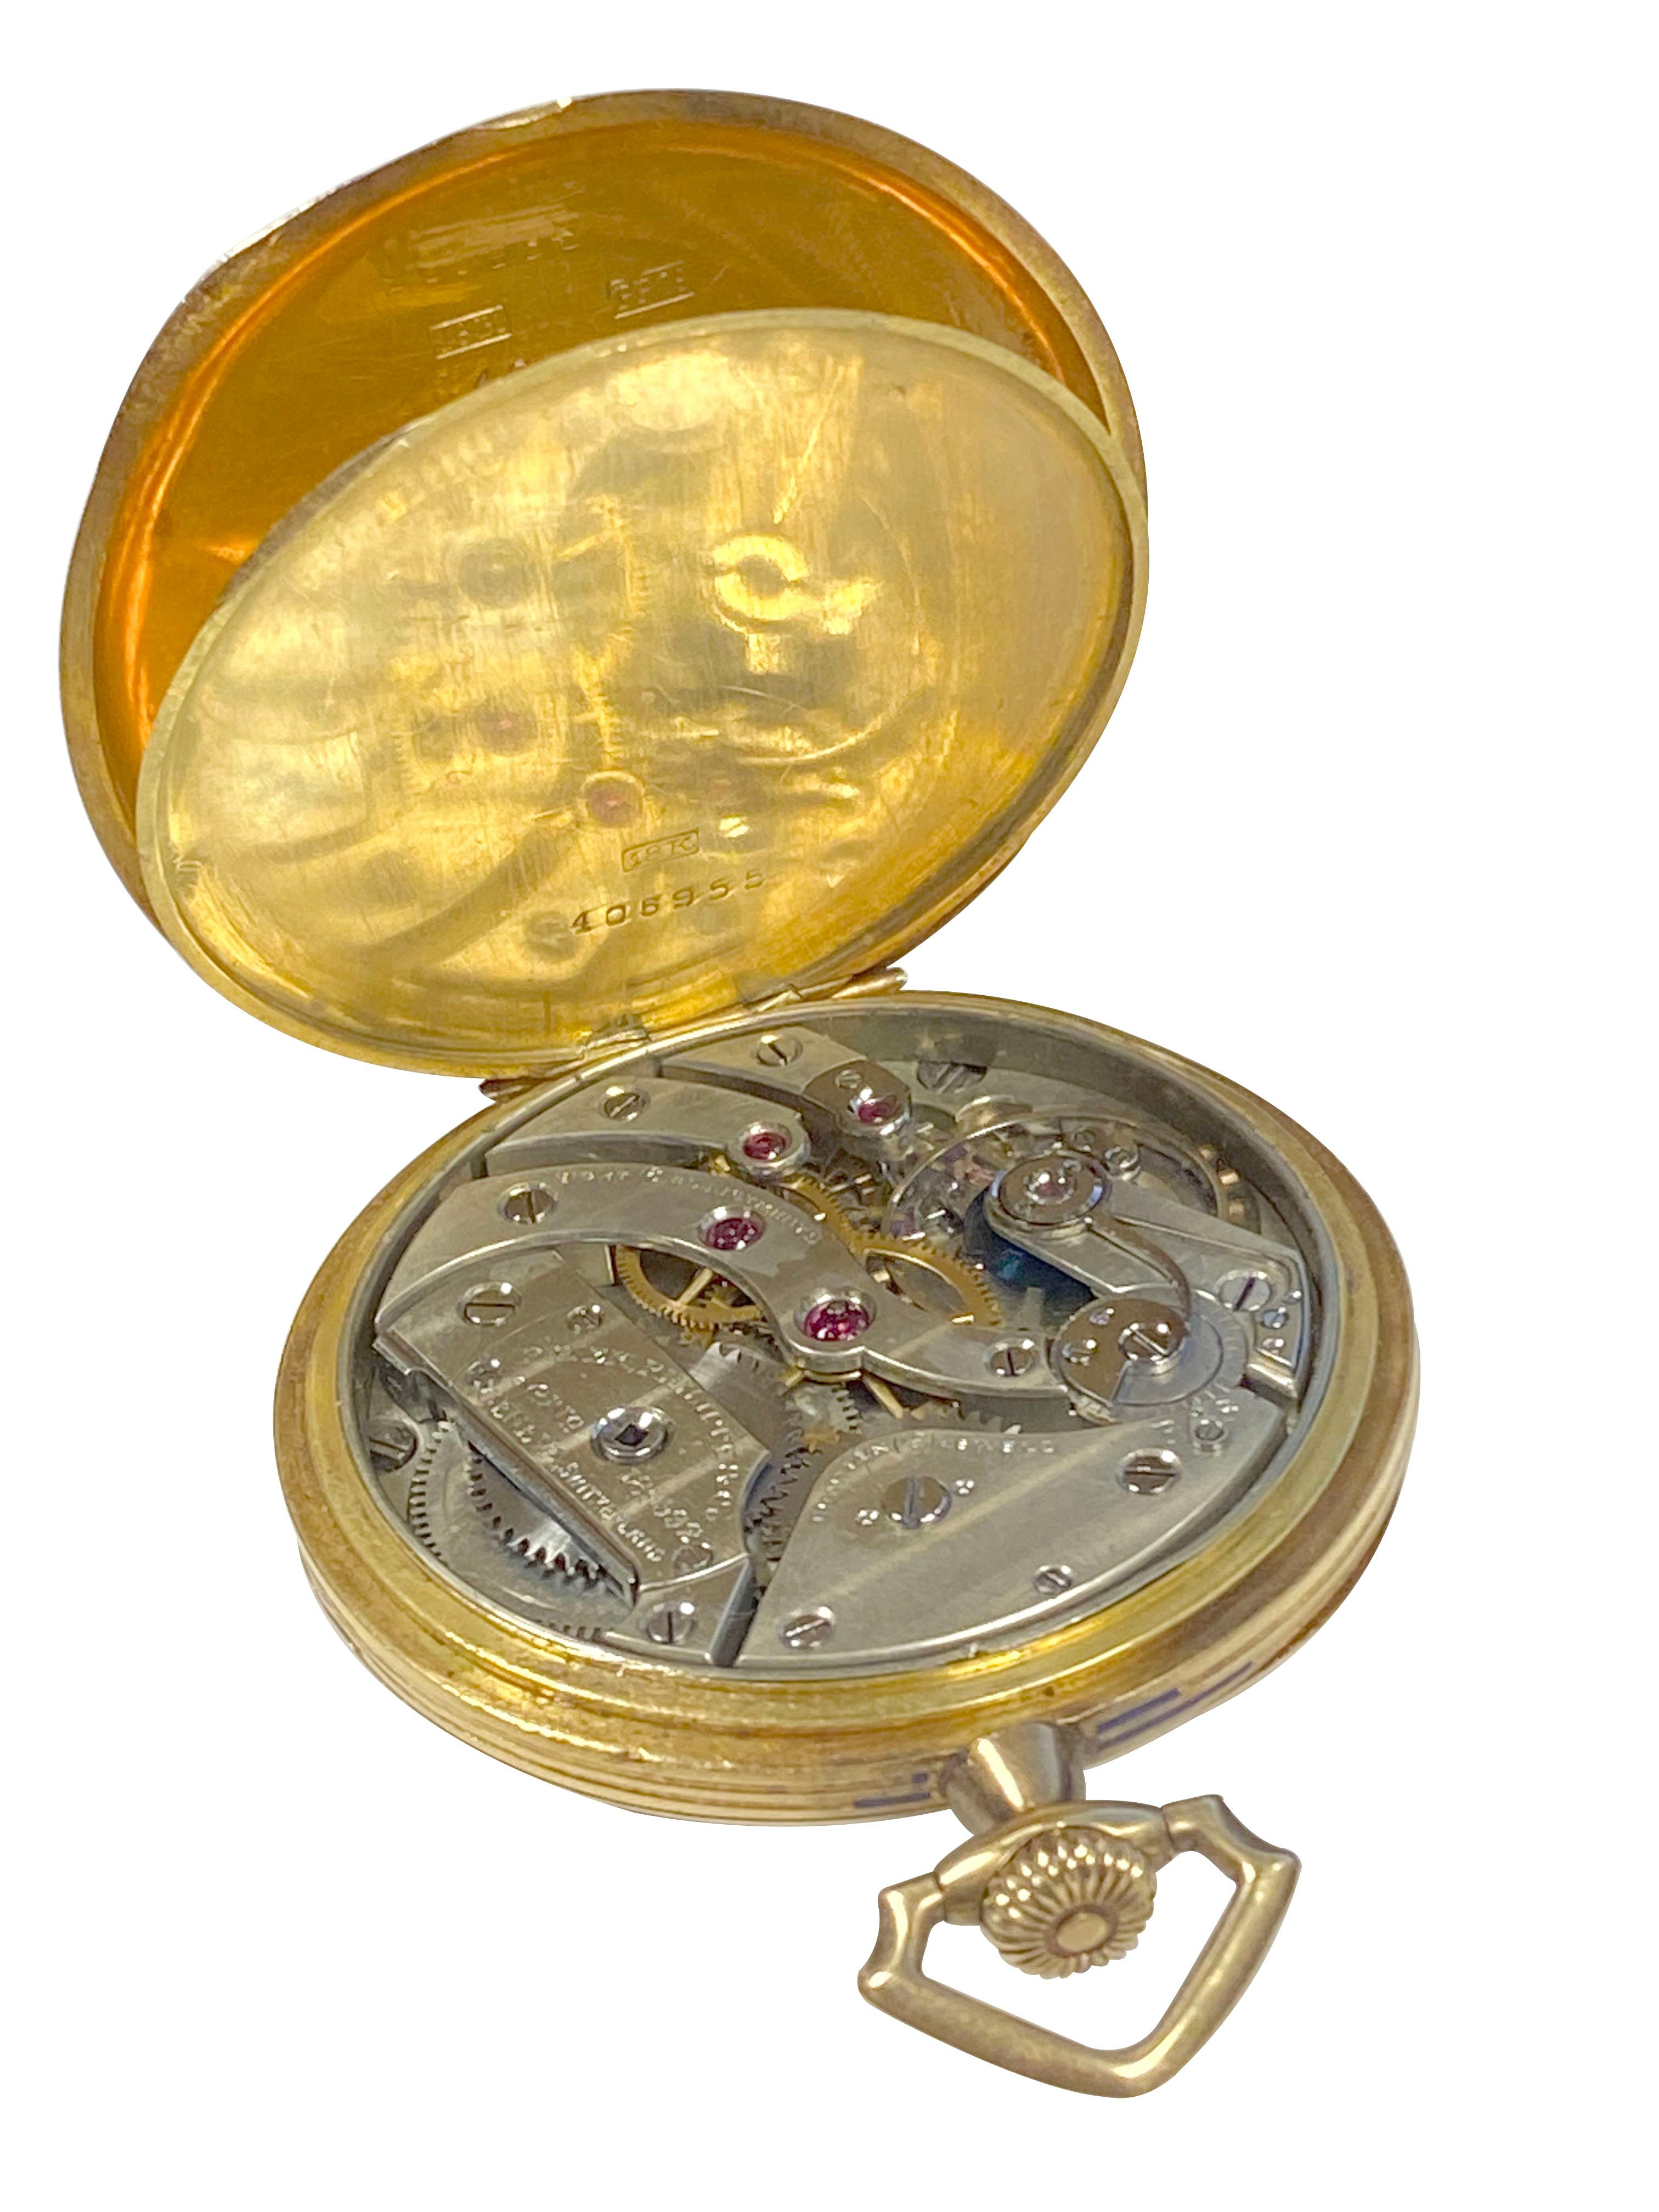 Patek Philippe Vintage Yellow Gold Fancy Chased Case Porcelain Dial Pocket Watch For Sale 1